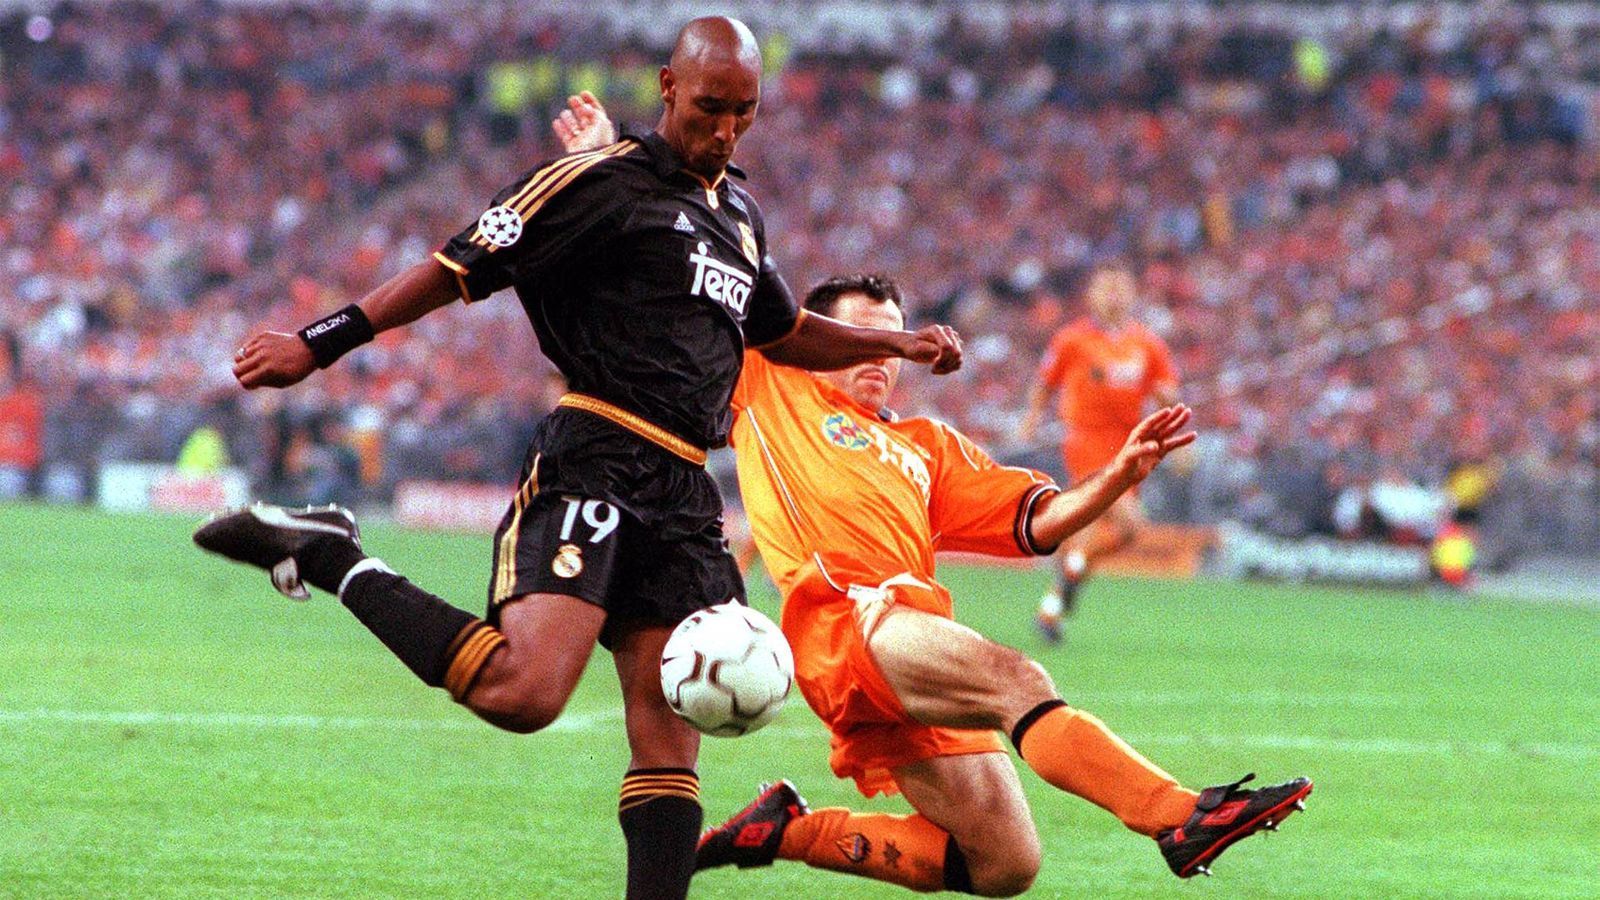 
                <strong>1999/2000 - Real Madrid - FC Valencia</strong><br>
                &#x2022; <strong>Ergebnis:</strong> 3:0 (1:0) - <br>&#x2022; <strong>Tore:</strong> 1:0 Fernando Morientes (39.) , 2:0 Steve McManaman (67.) , 3:0 Raul (75.)  <br>
              